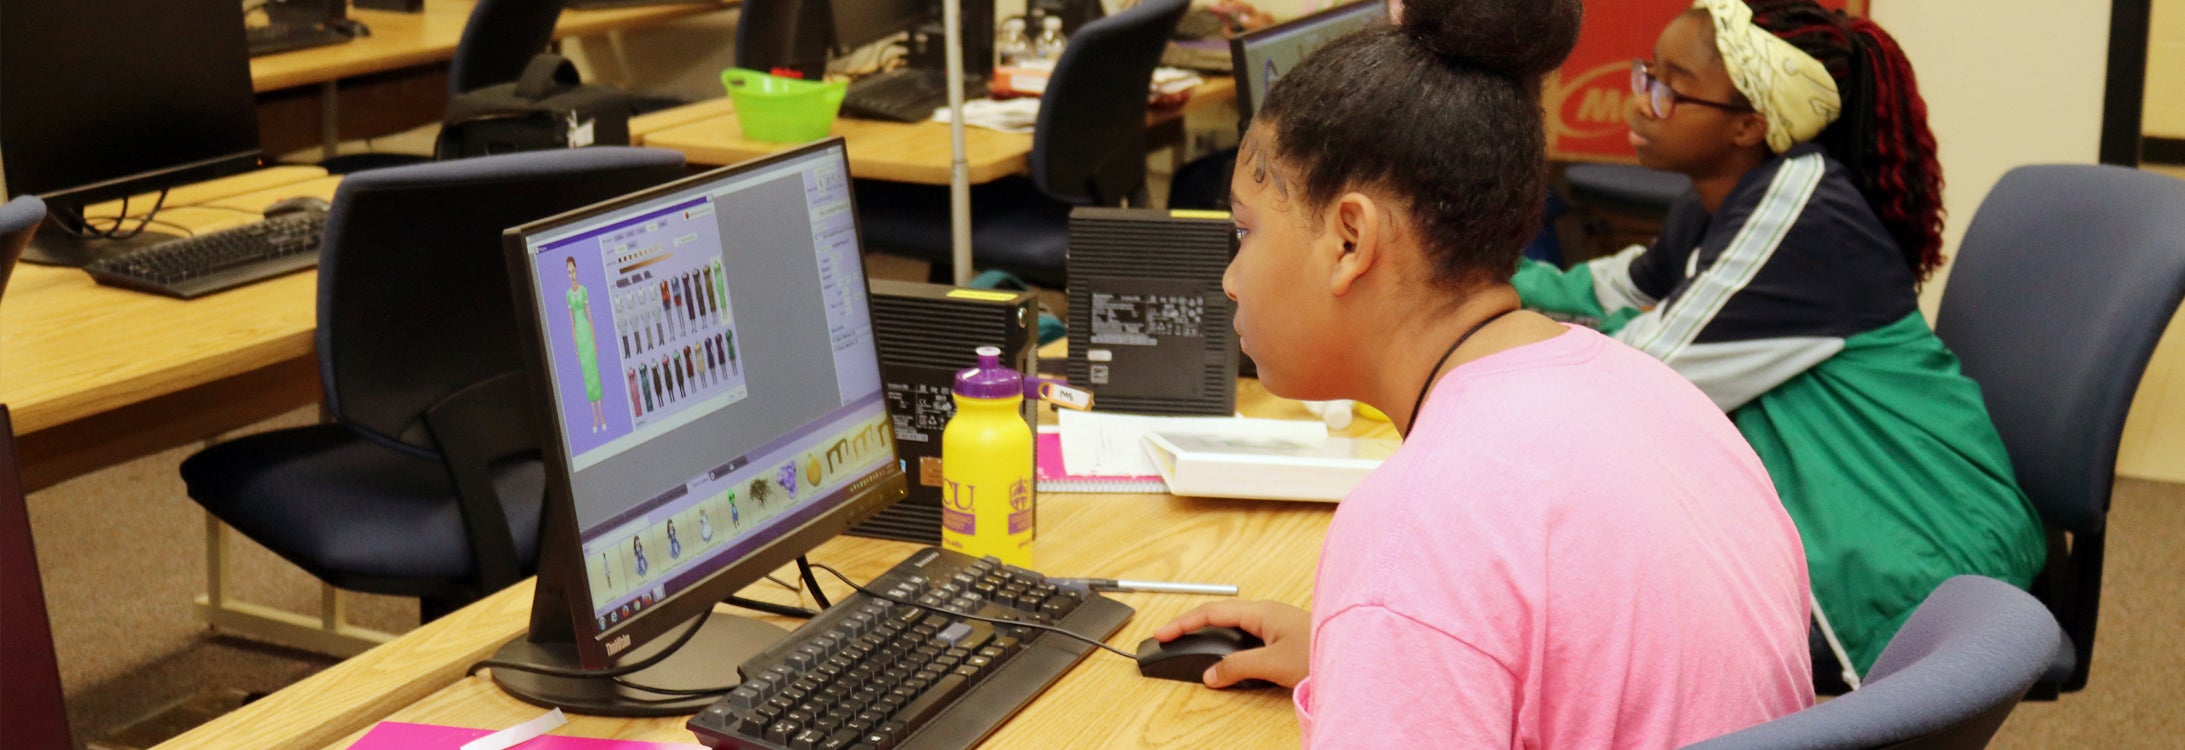 South Creek High School student Mya Staton uses animation software to create characters for her project at the 2019 Management Information Systems Science, Technology, Engineering and Mathematics Camp hosted by East Carolina University. Staton was one of 16 female students from the Boys and Girls Club of the Coastal Plains to participate in the camp.